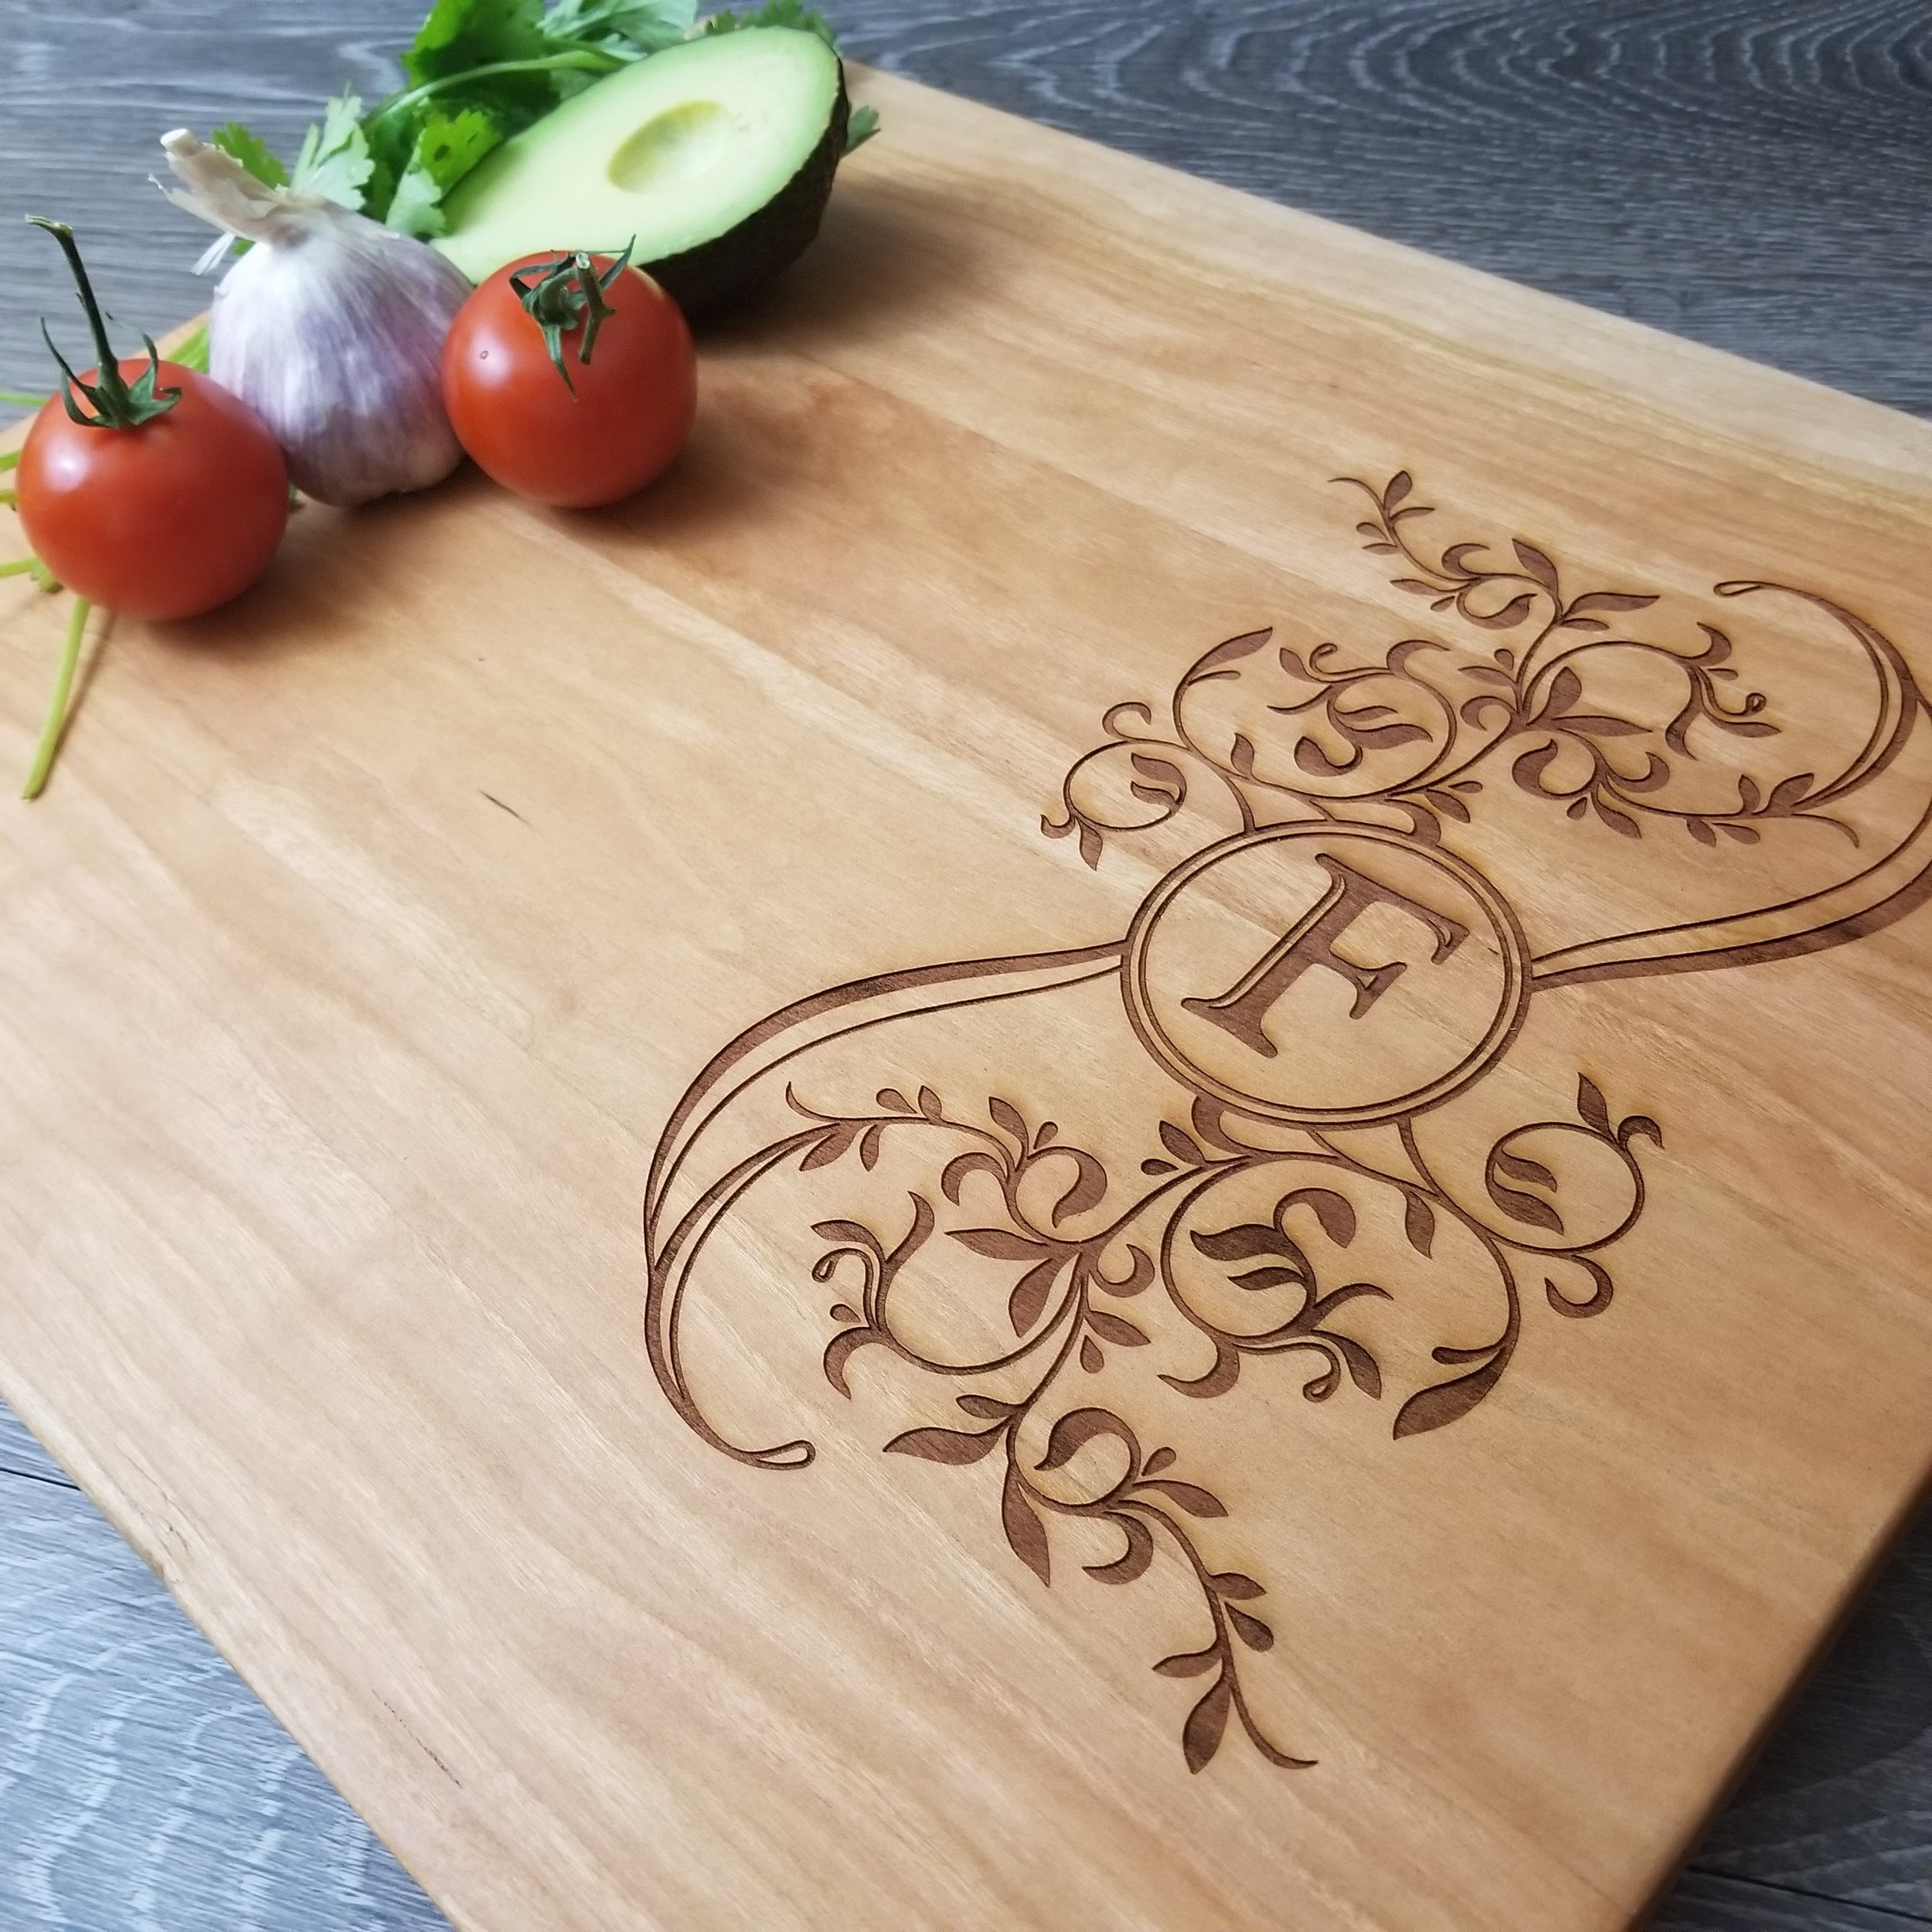 Personalized Cutting Board Custom Inscription & Choose From 4 Types of Wood